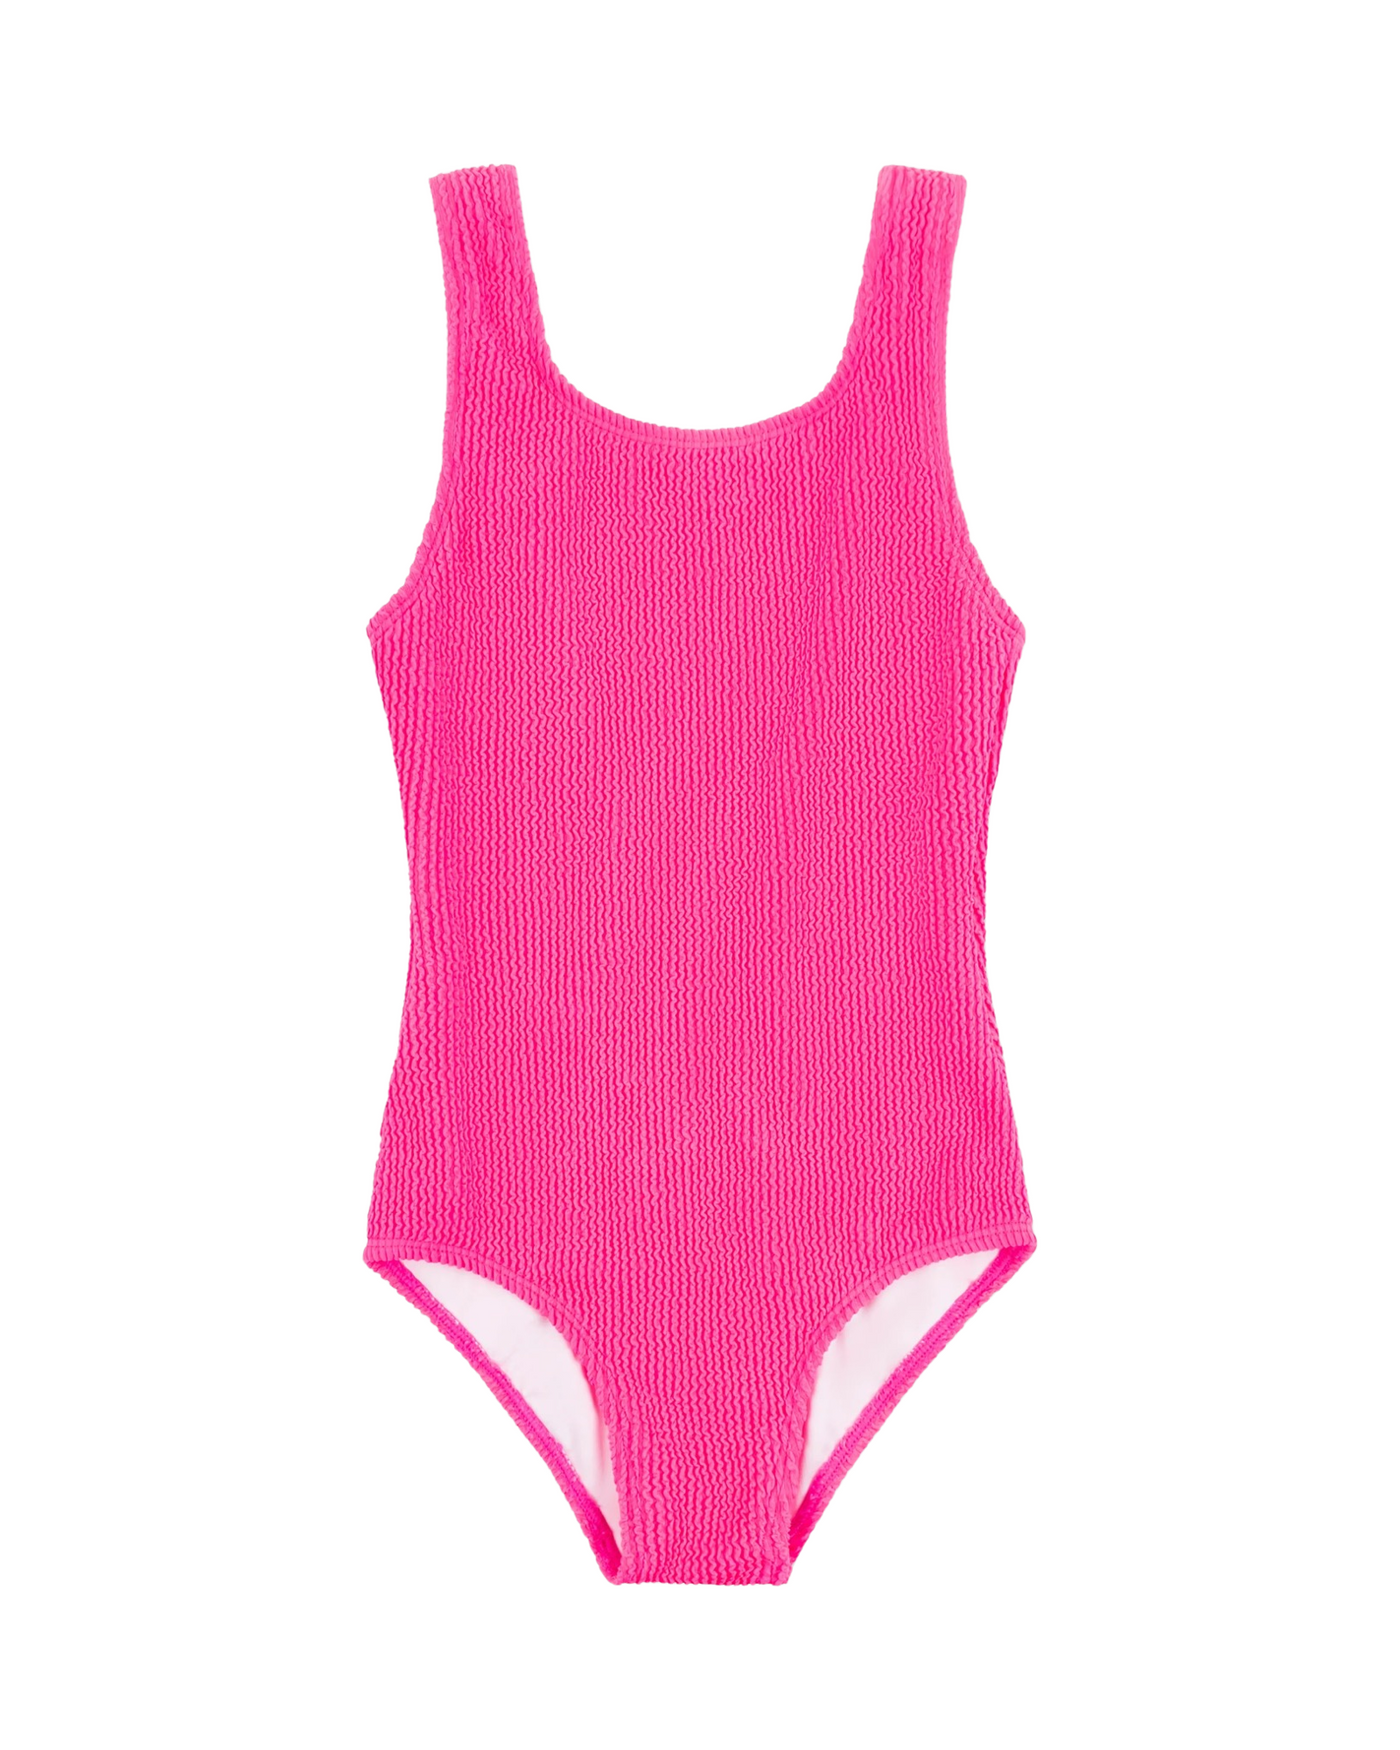 Maeve Hot Pink Crinkle One Piece Swim Suit